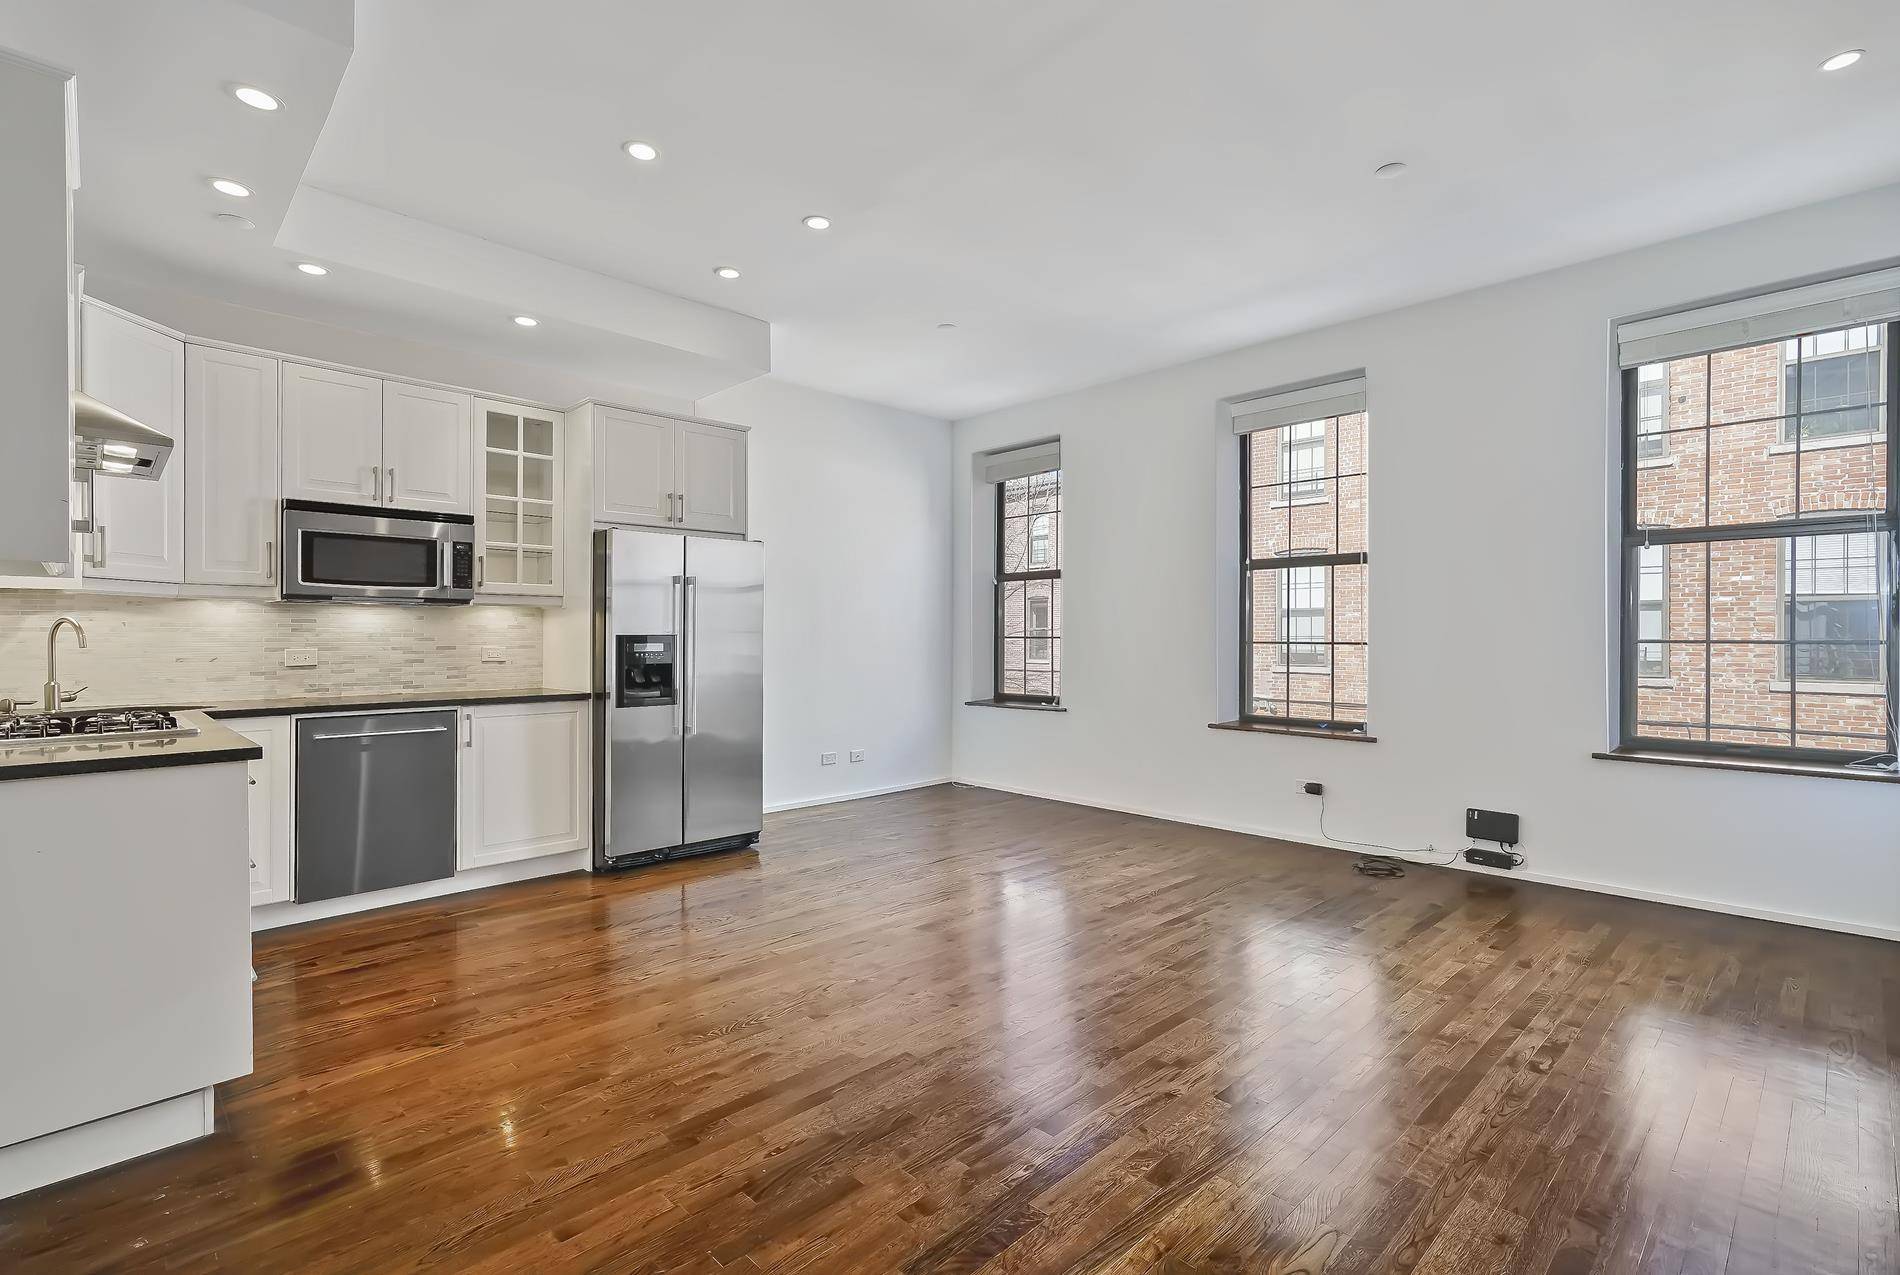 Centrally located at the apex of four prime Brooklyn neighborhoods and Atlantic Center Terminal's transportation hub a commuter's dream this large 2 bedroom, 1.